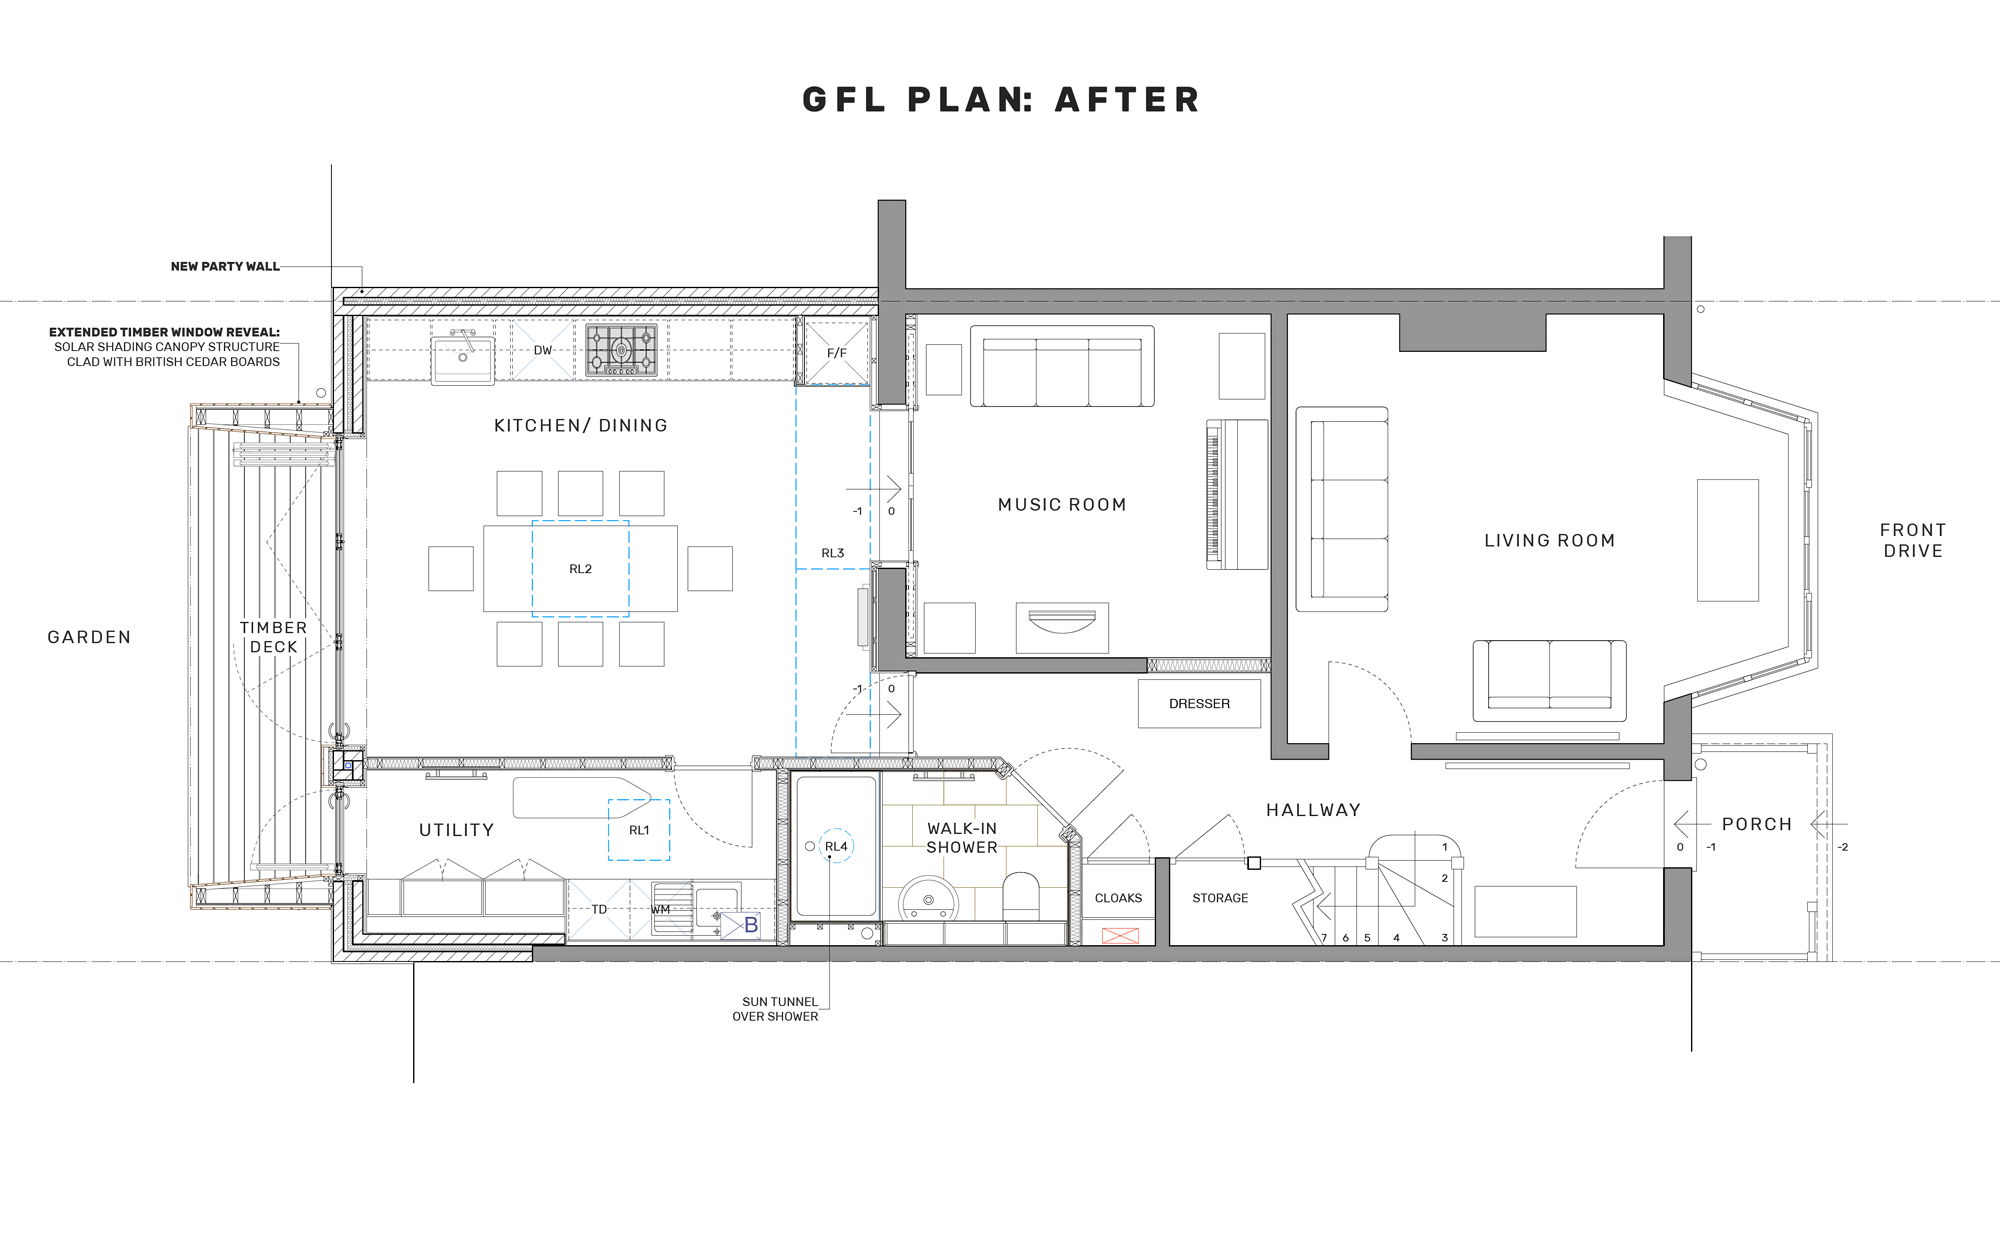 1 to 50 scale floor plan of rear extension to terraced house